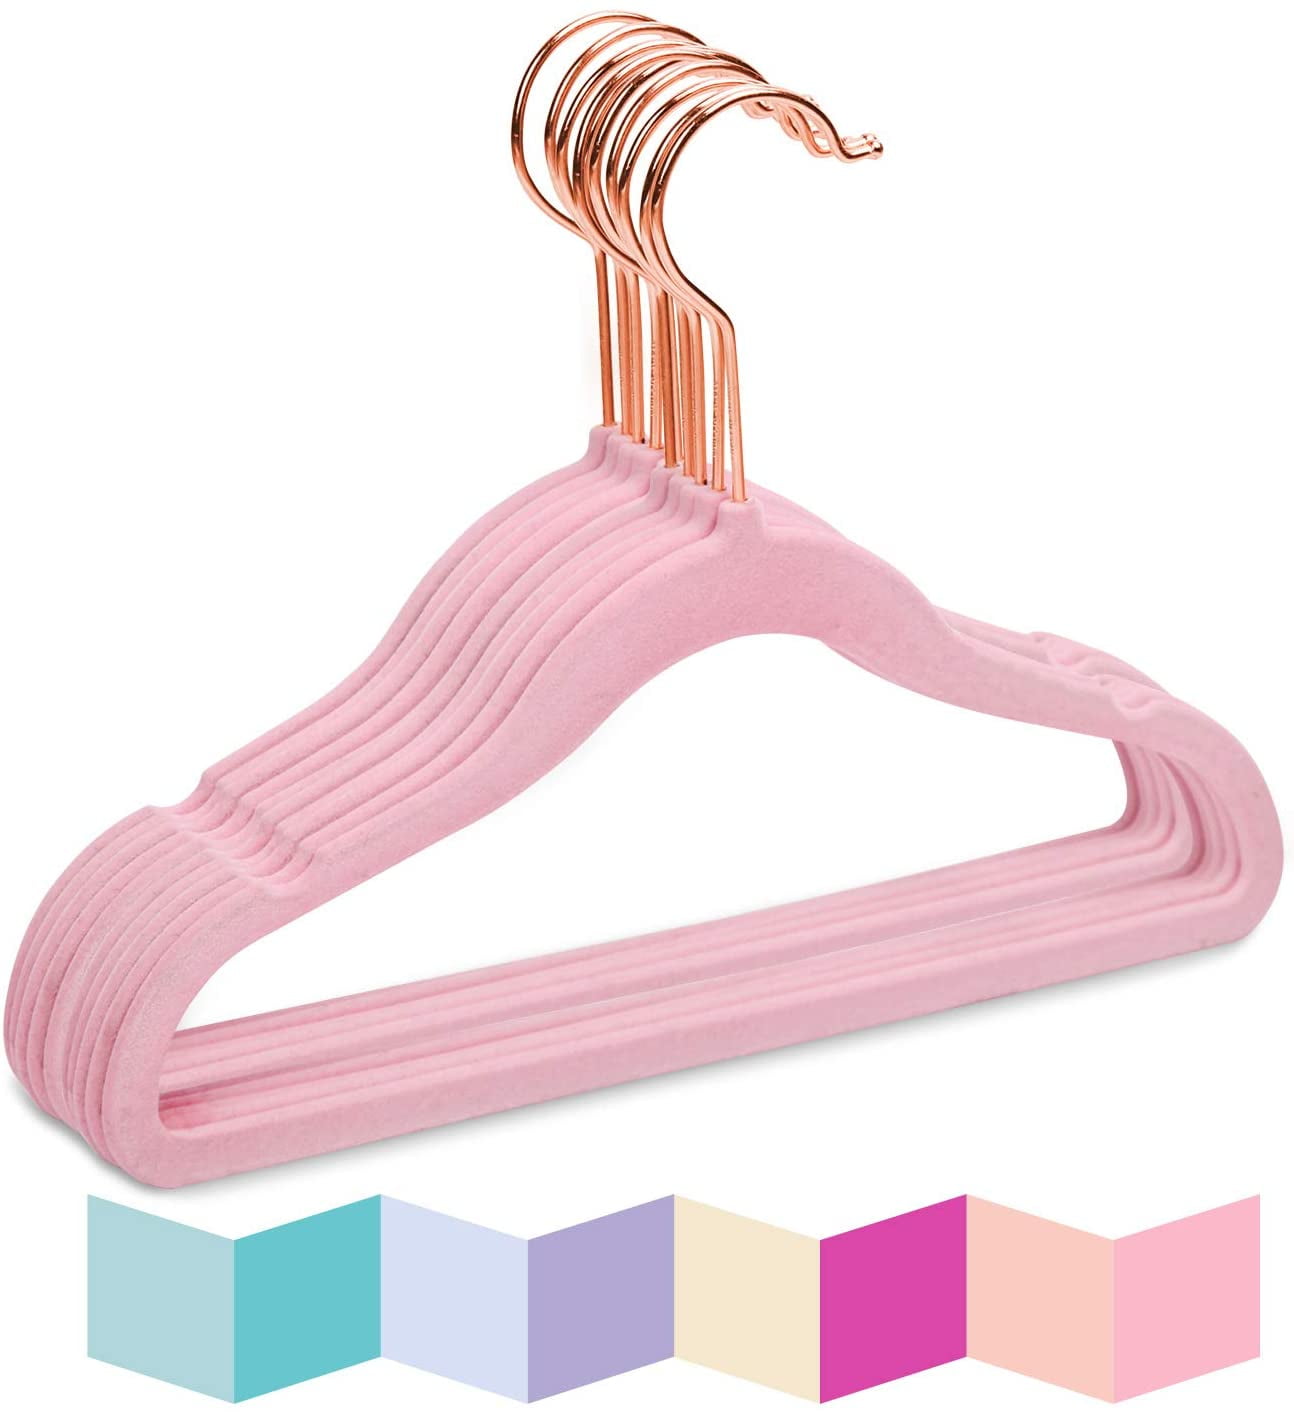 HTAIGUO Premium Kids Velvet Hangers Pack of 50 with CopperRose Gold  HooksSpace Saving Ultra ThinNon Slip Baby Hangers for Childrens Skirt  Dress PantsClothes Hangers by Pink  Walmart Canada